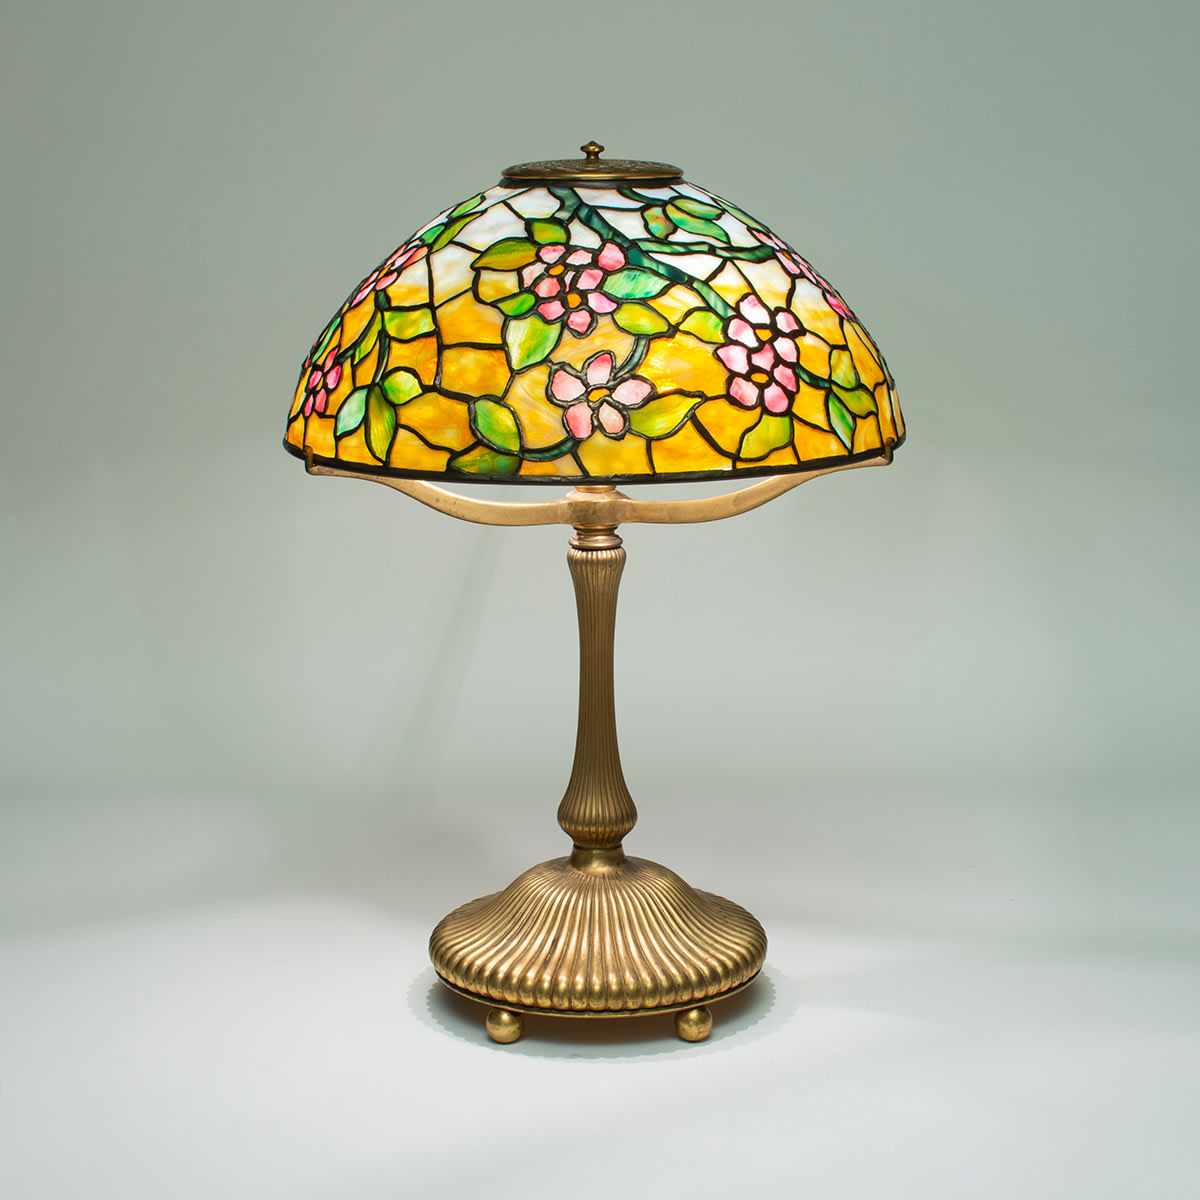 a tiffany lamp with leaded glass shade depicting greenish branches with pink mottled apple blossoms and green leaves against a background of mottled yellow glass, on a base of gilt bronze with vertical fluting